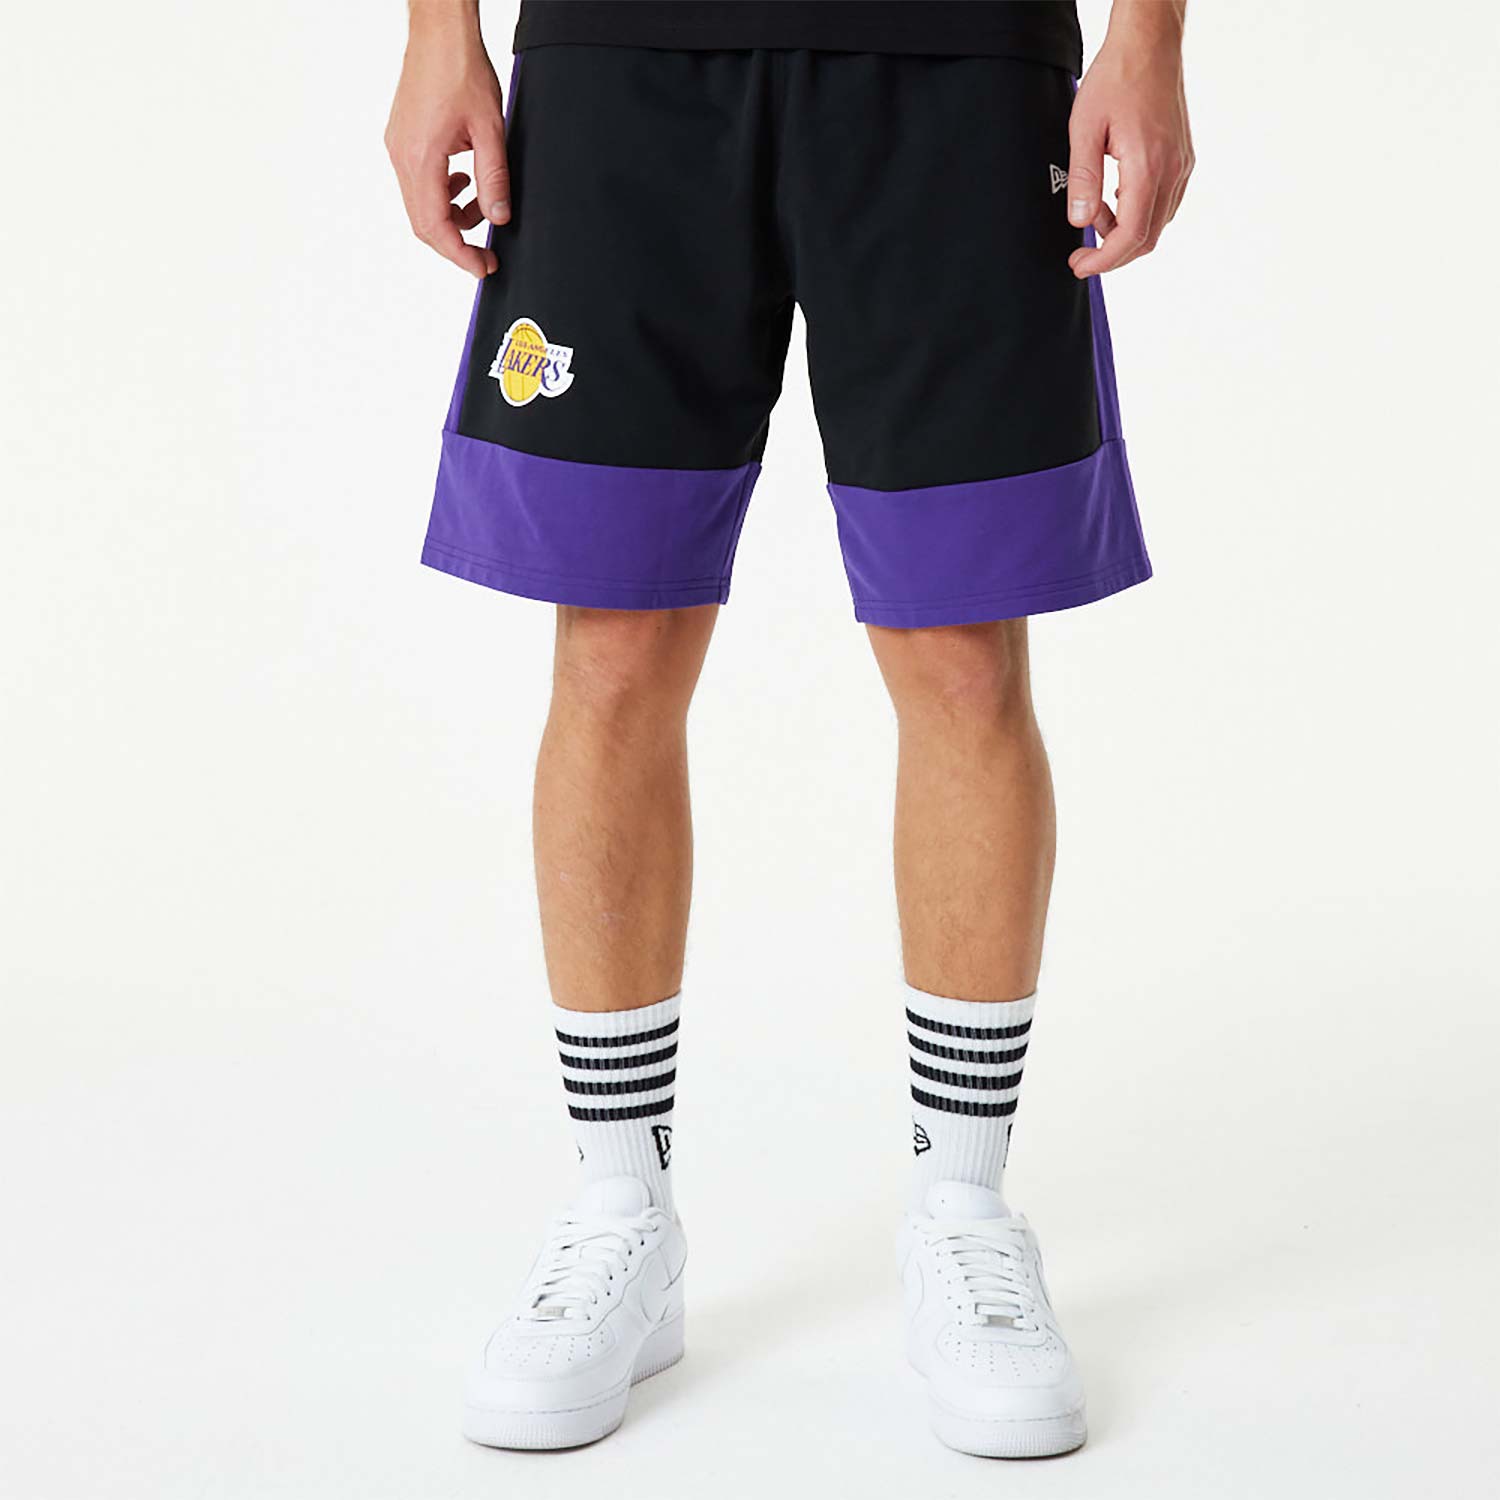 lakers workout shorts